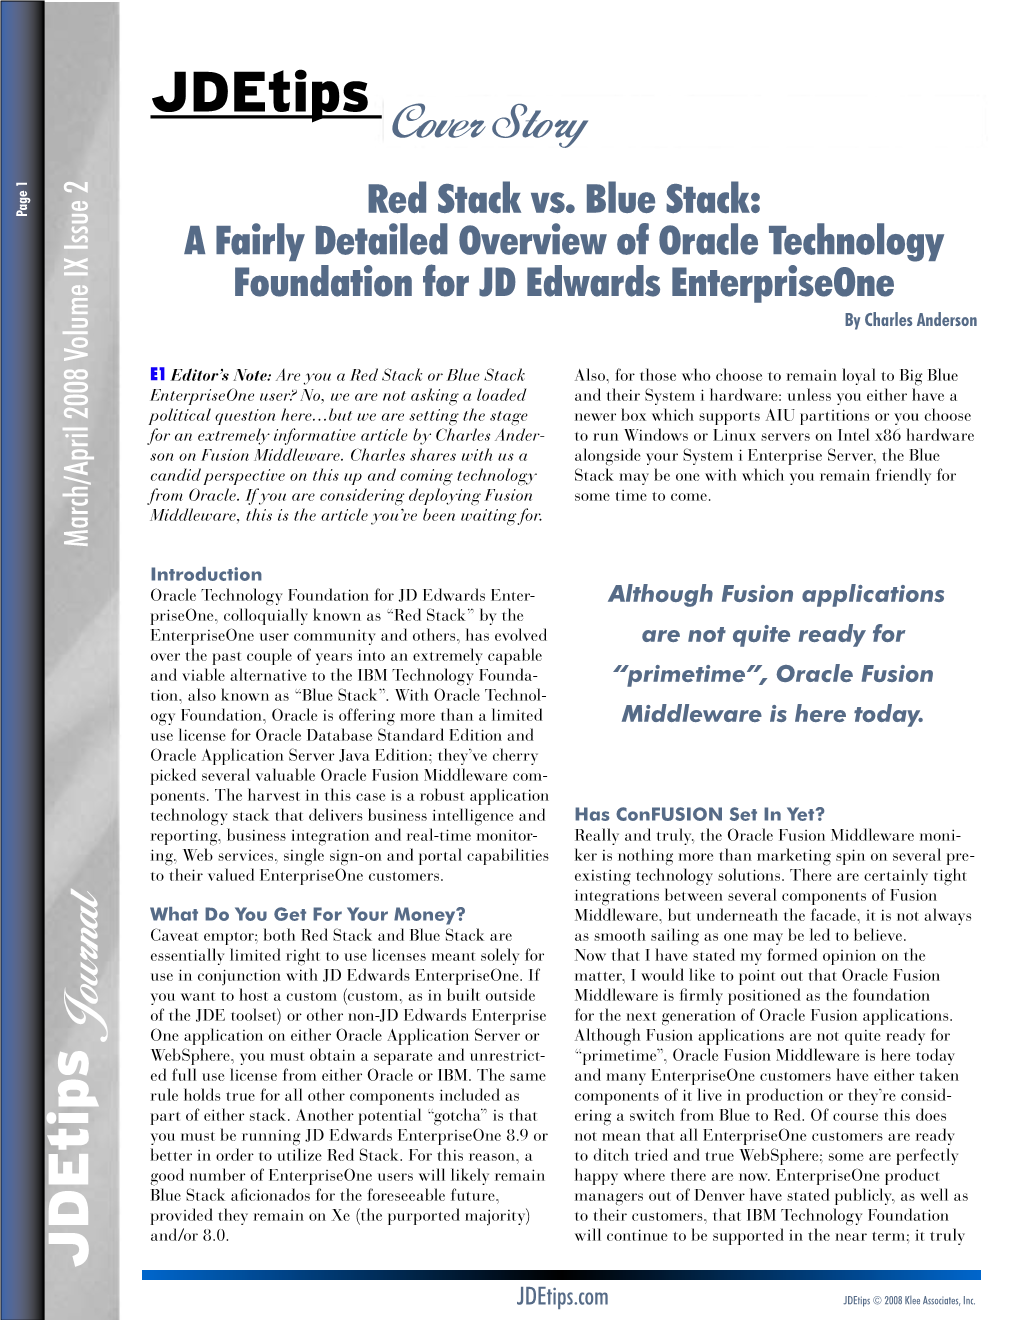 Red Stack Vs. Blue Stack: a Fairly Detailed Overview of Oracle Technology Foundation for JD Edwards Enterpriseone